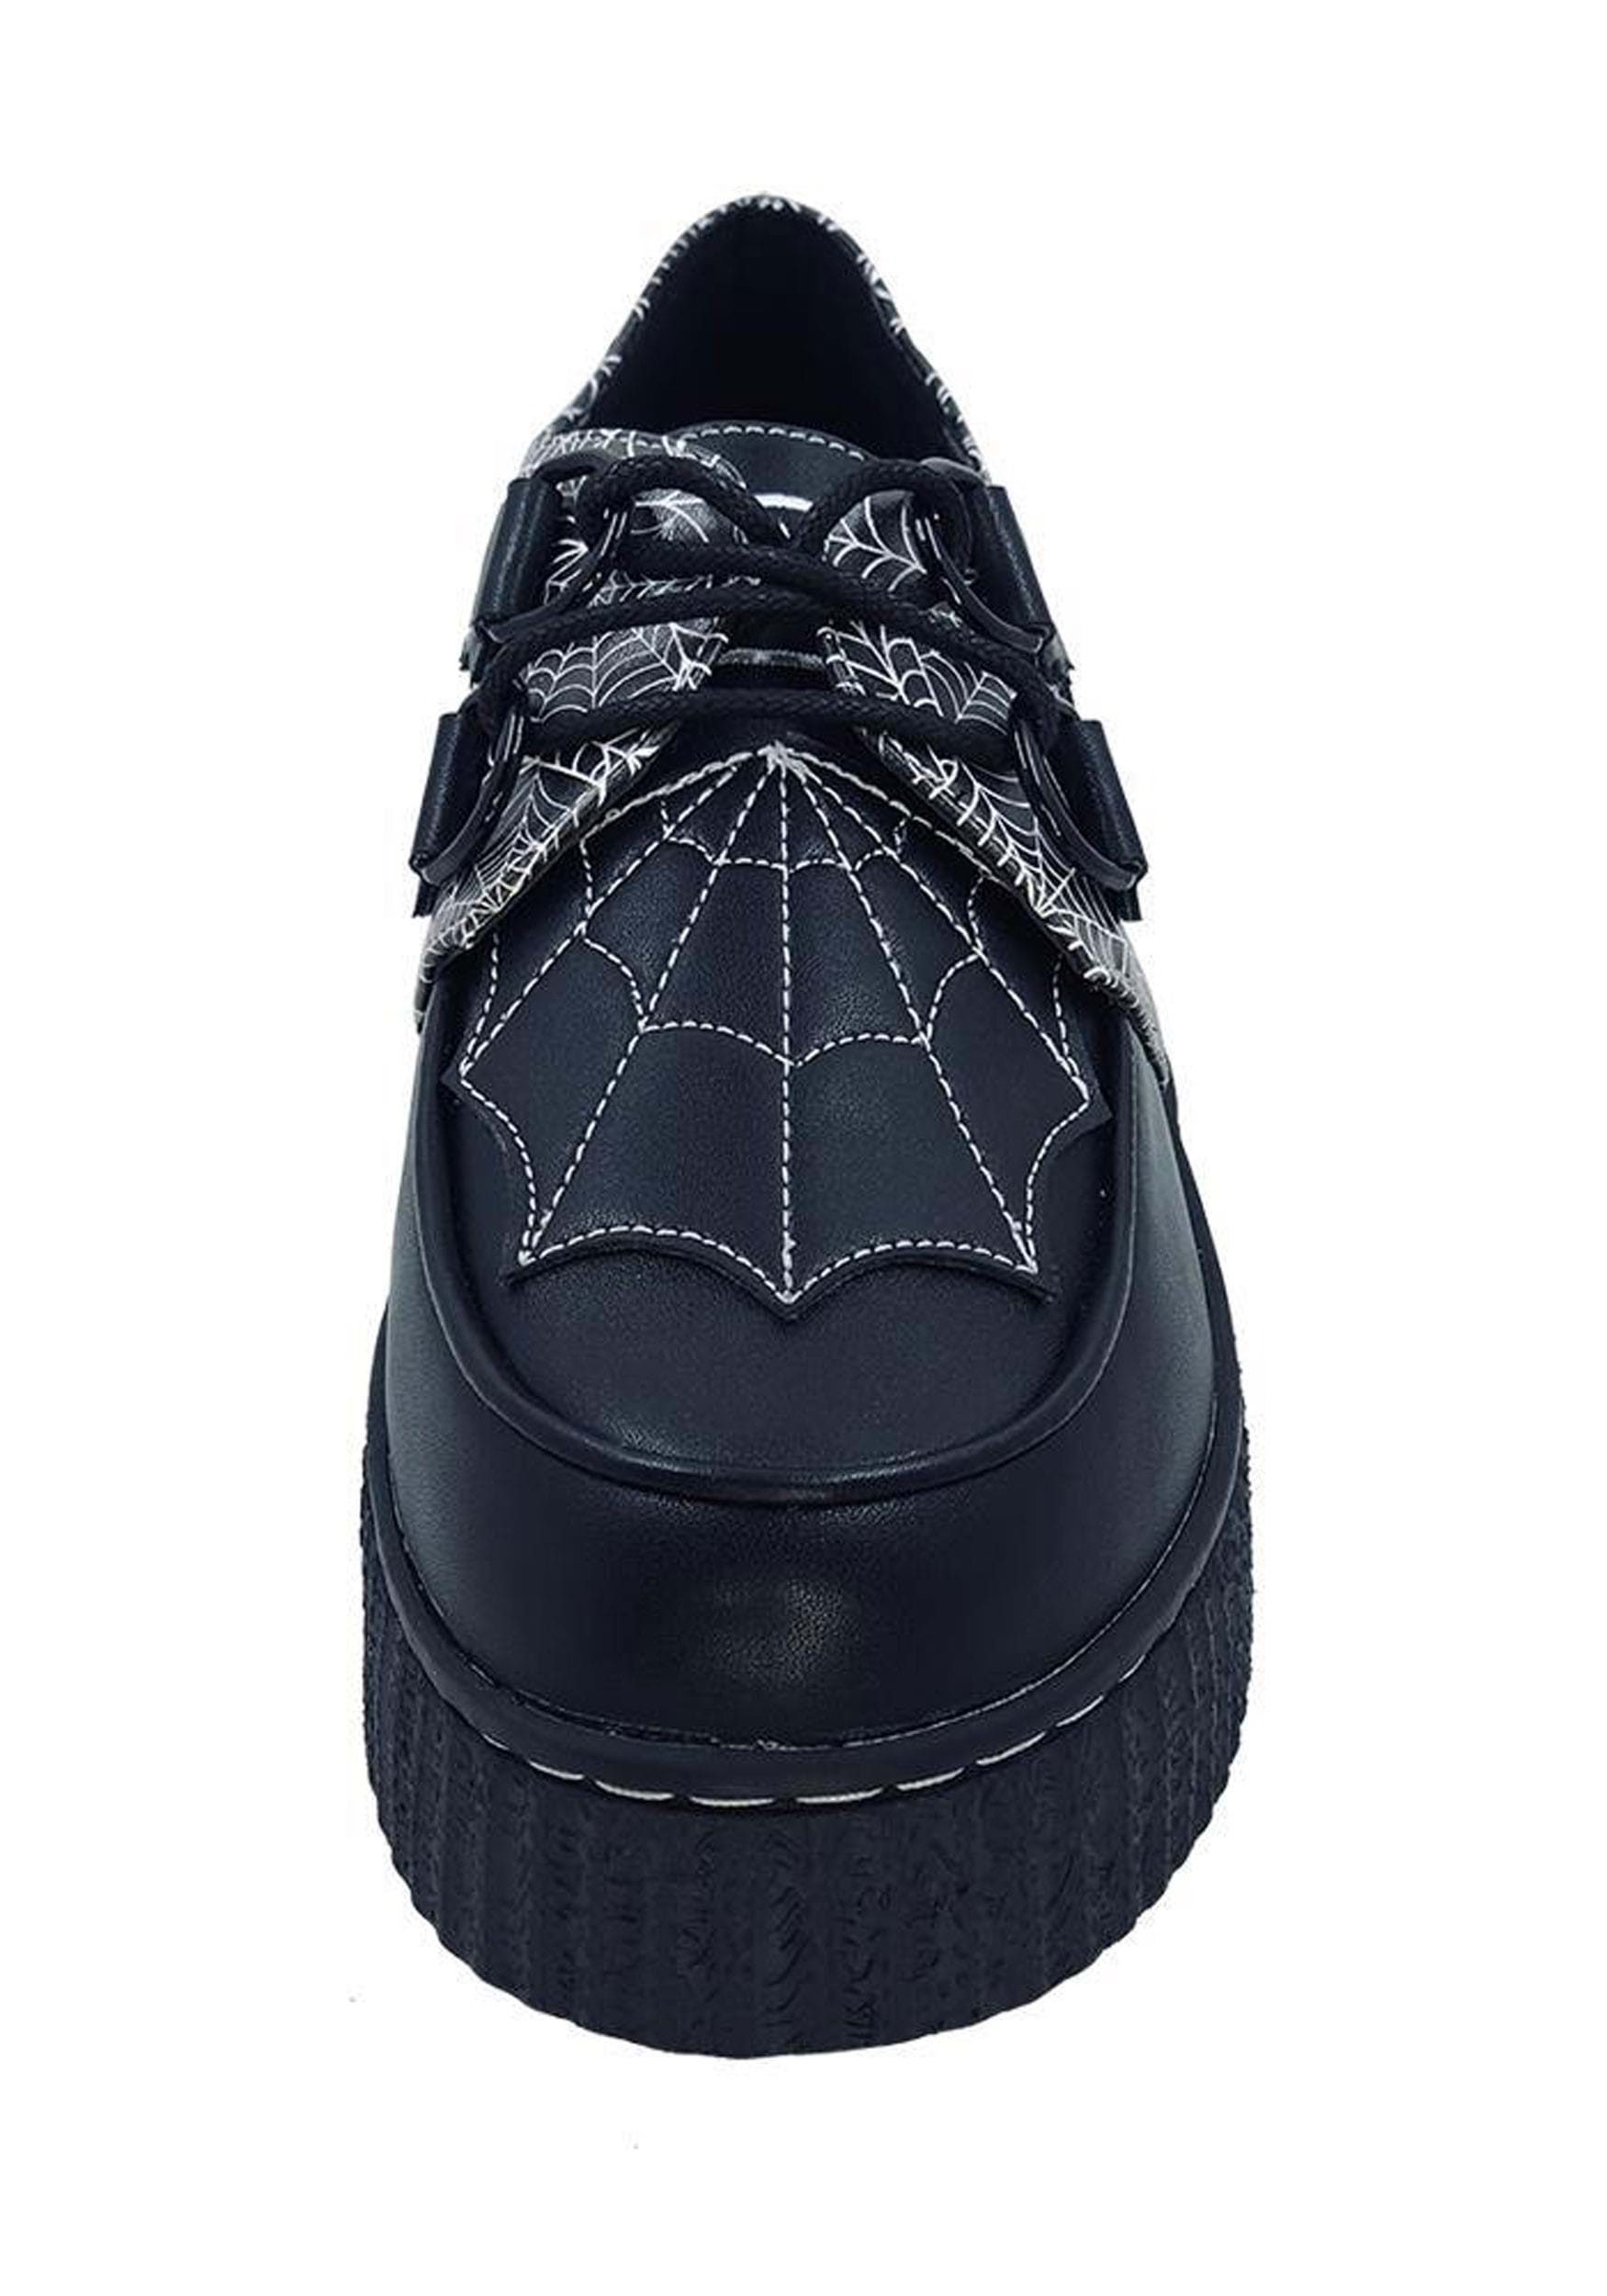 Krypt Spiderweb Creeper Shoes For Women